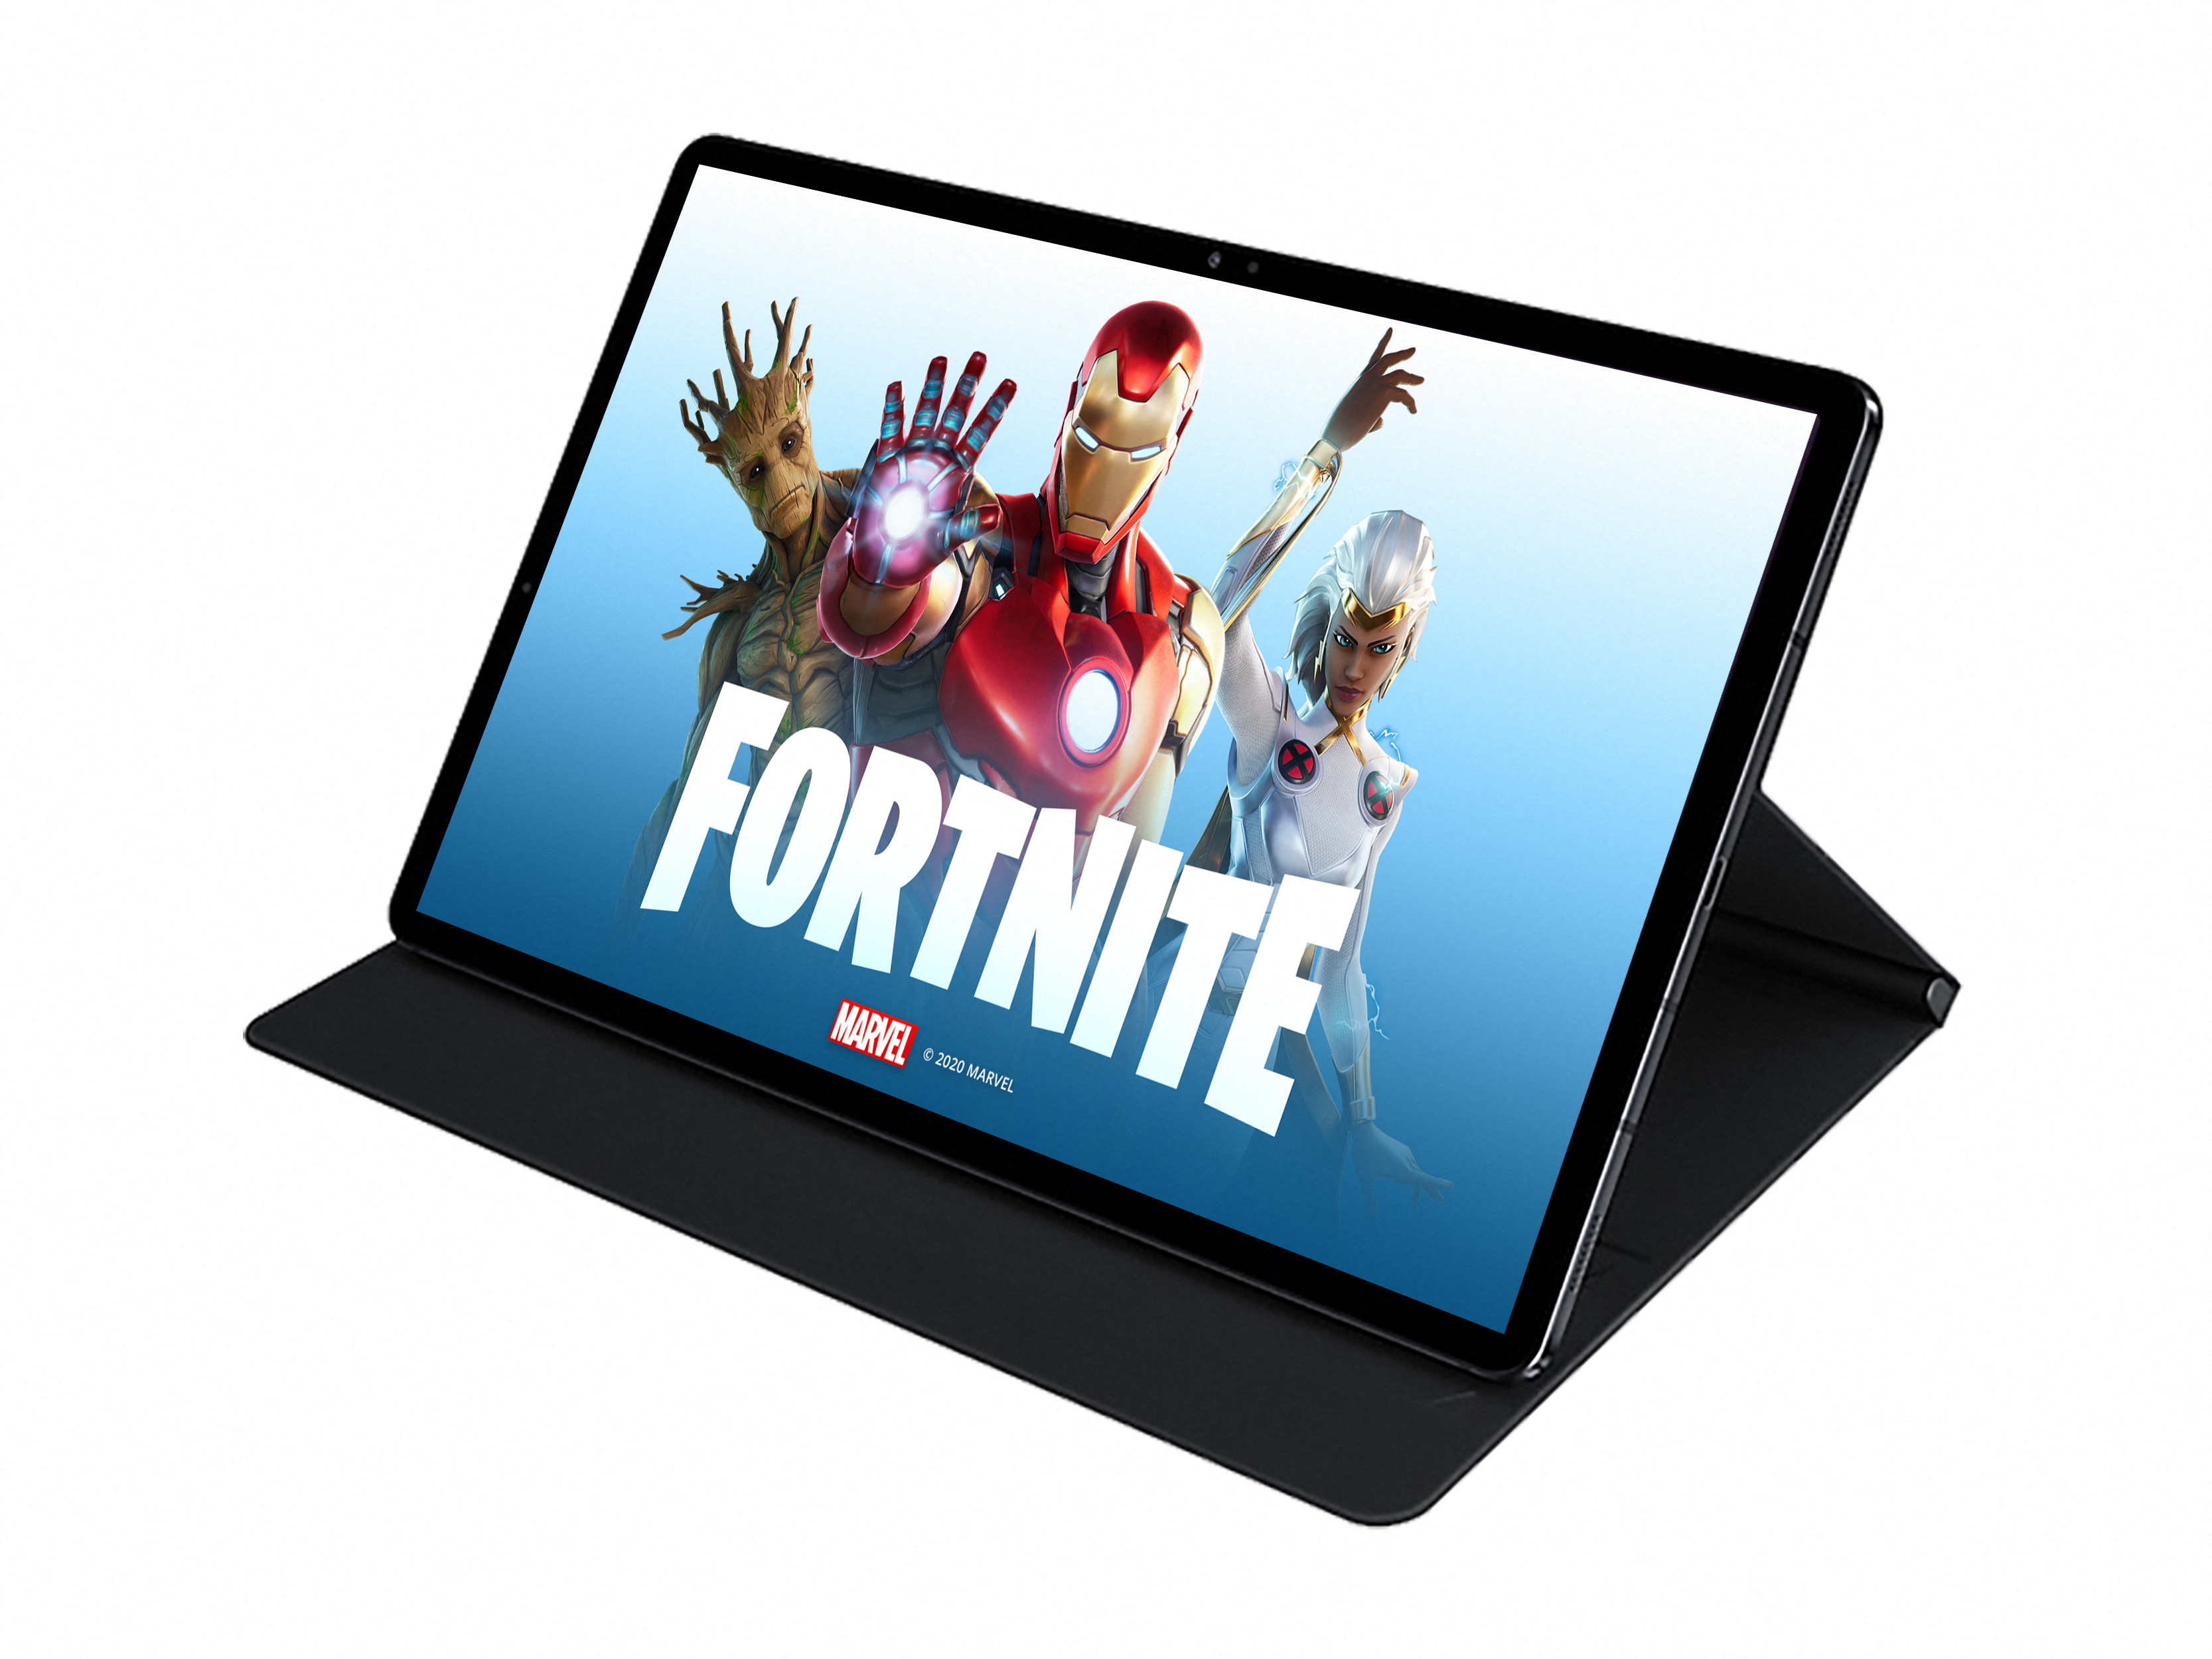 Fortnite passe en mode 90 fps sur les Samsung Galaxy Tab S7 and S7+